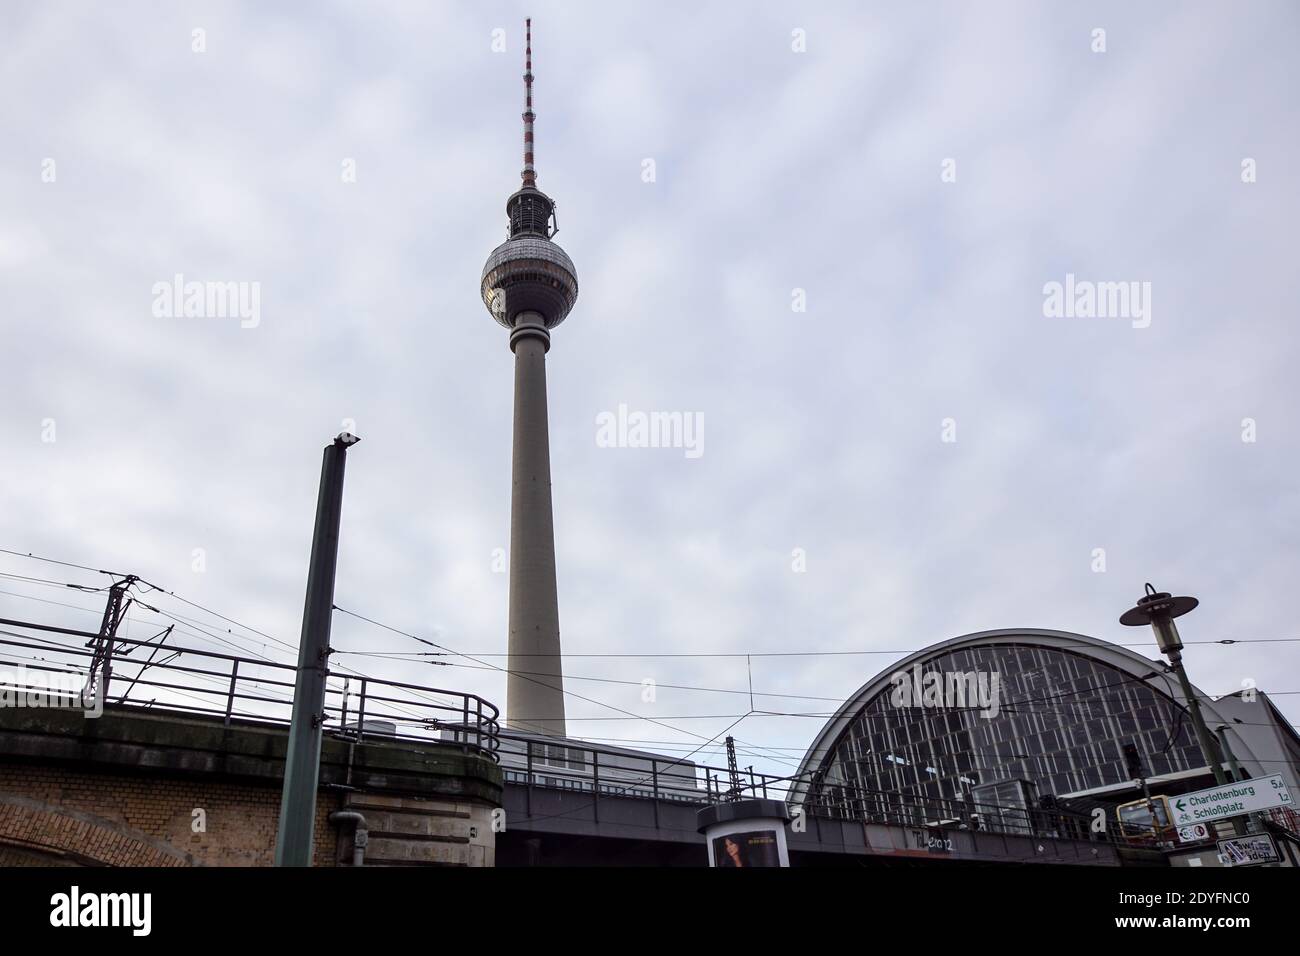 Berlin, Germany - November 12, 2020 - The historical Friedrichsbr cke with old buildings an the famous Berlin TV tower Berliner Fernsehturm in the Stock Photo